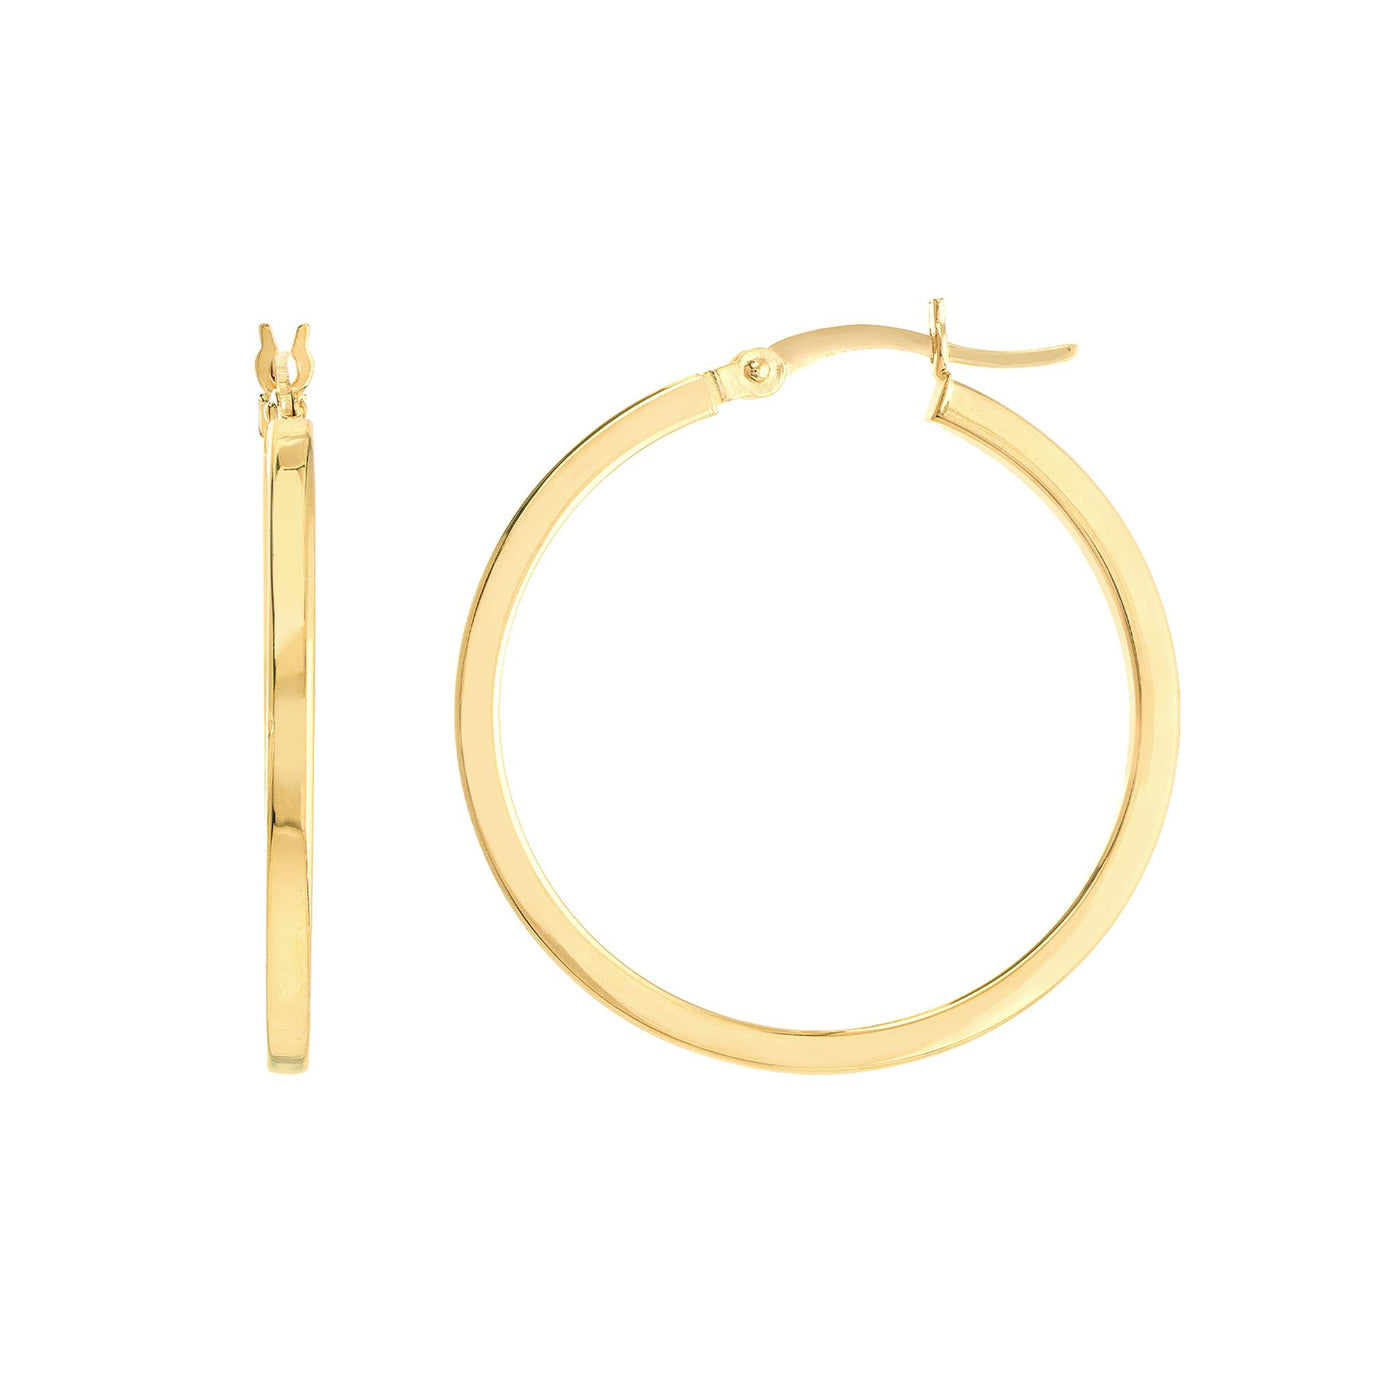 14K Yellow Gold 2mm x 30mm Square Tube Design Round Hoop Style Earrings